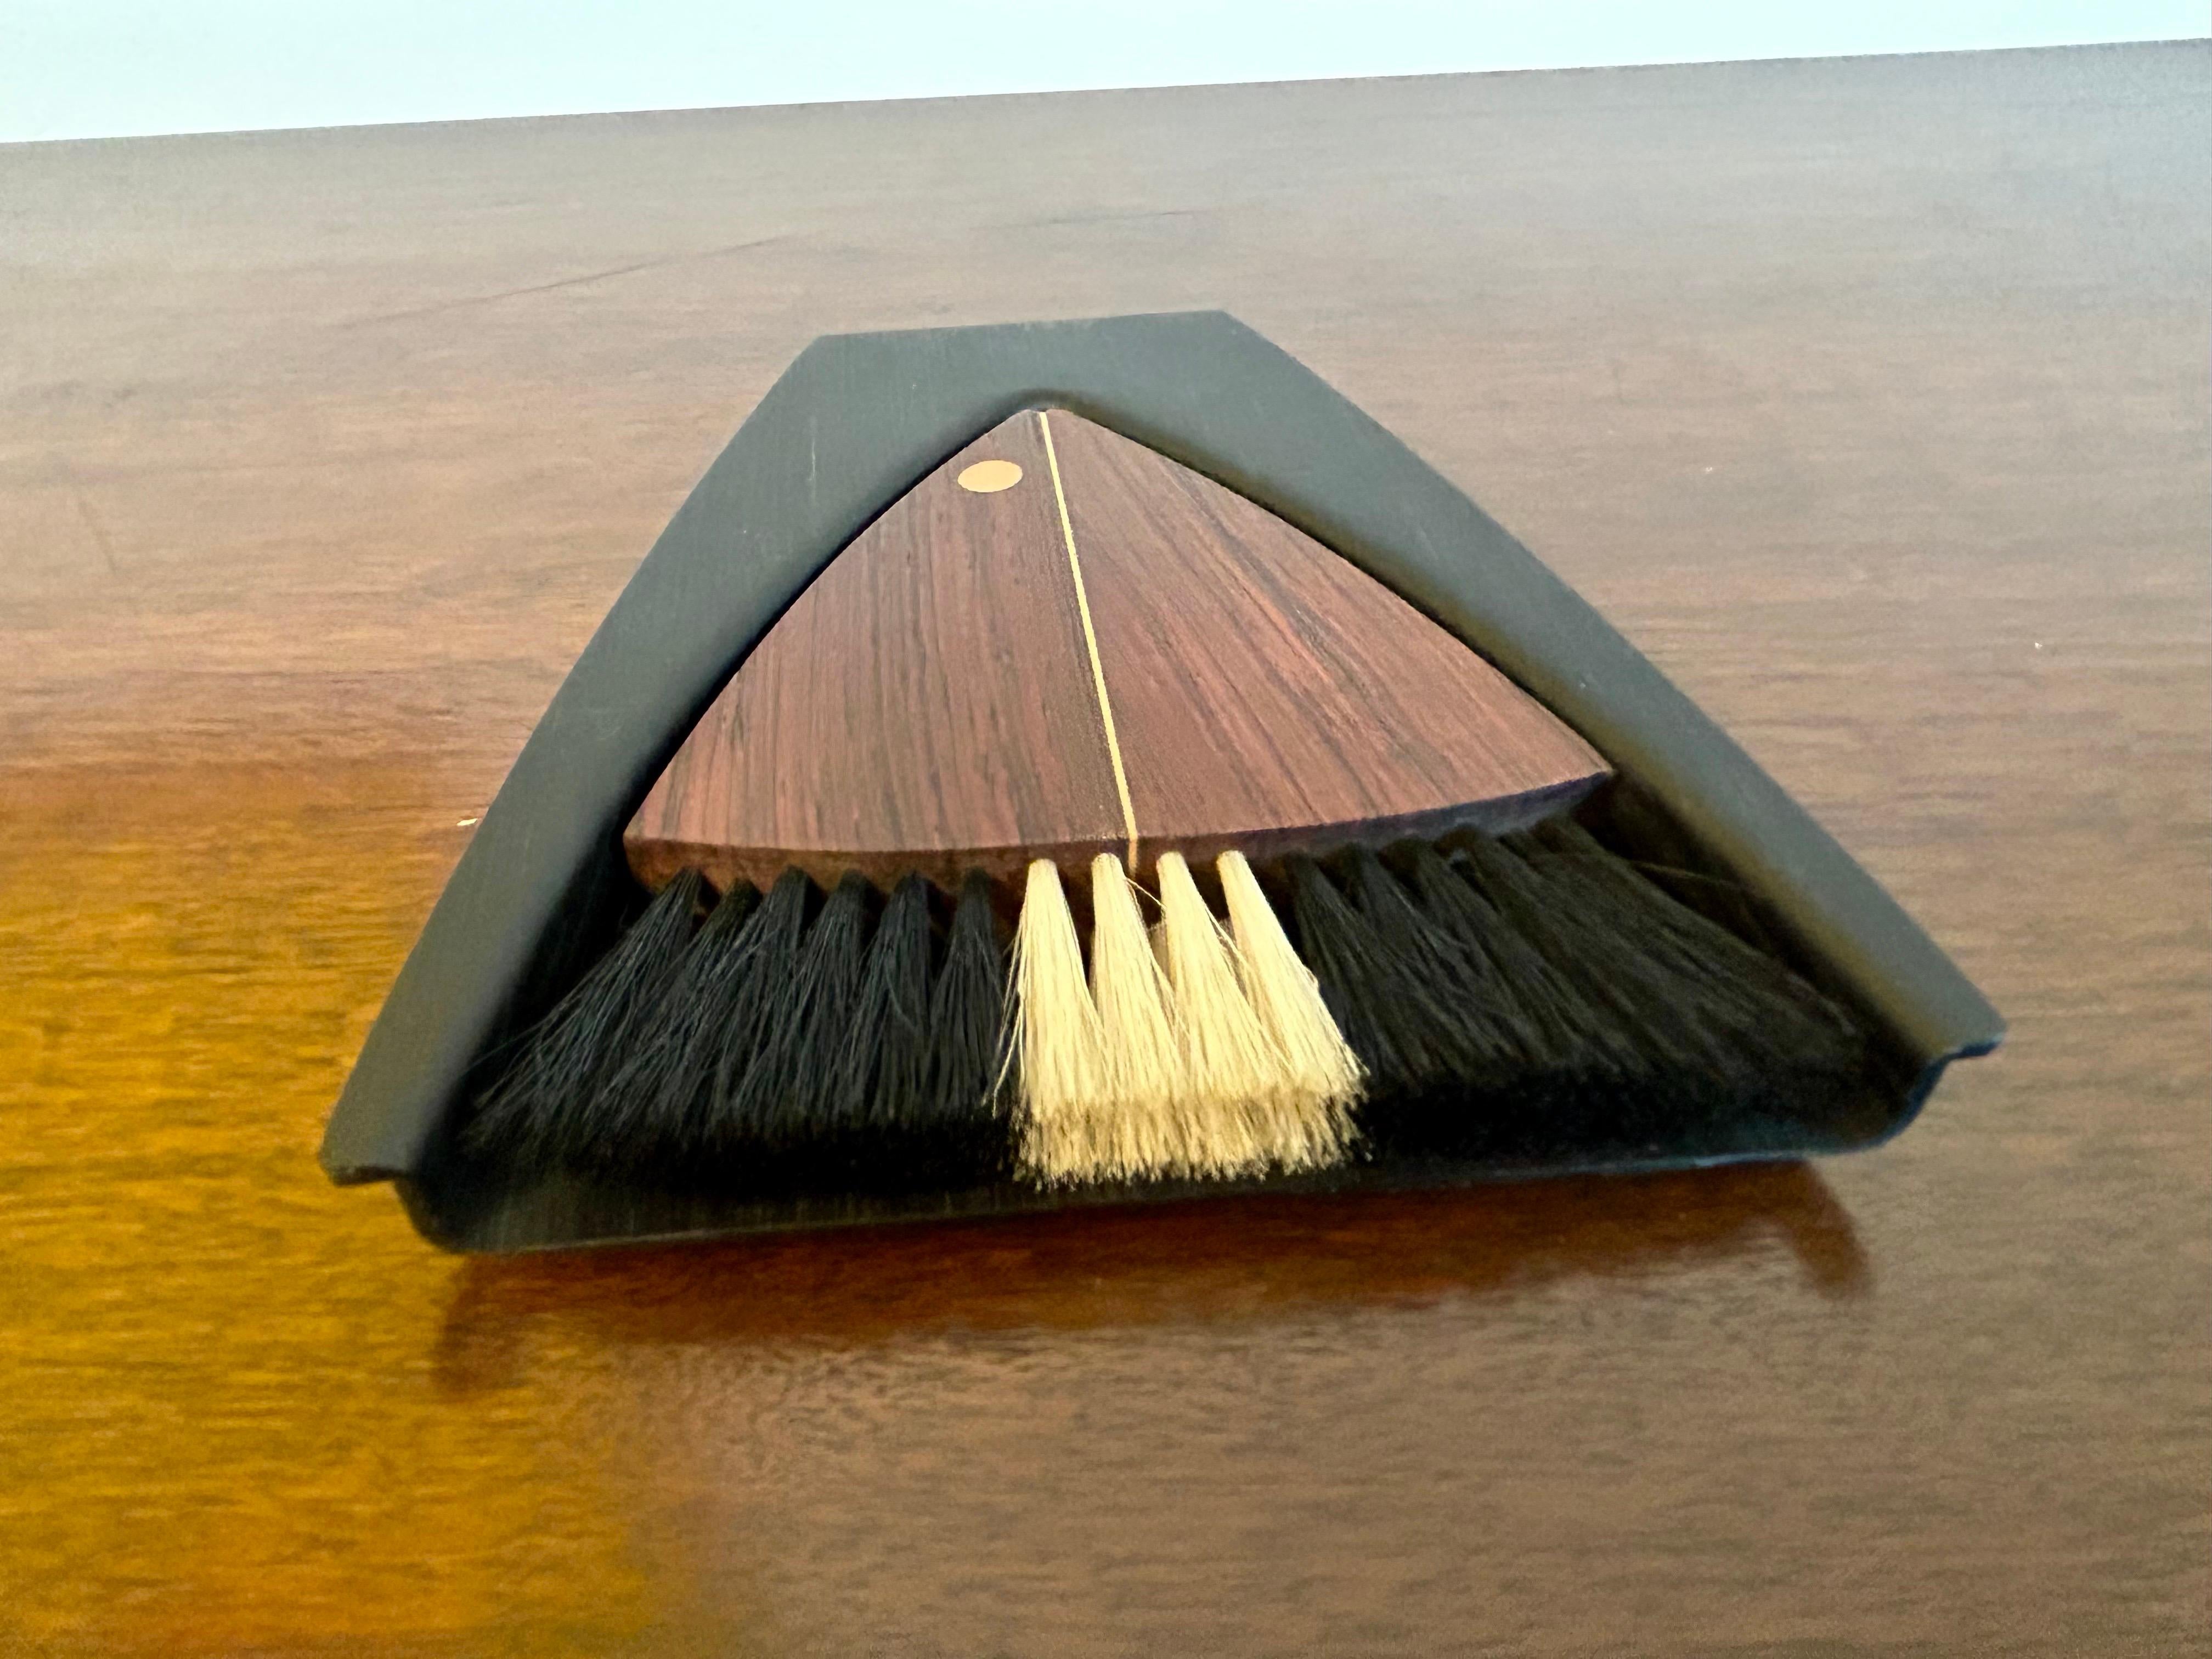 Whimsical modern design.
Mixed woods.
Great for dusting those little crumbs and hairs around the home, office or car....
